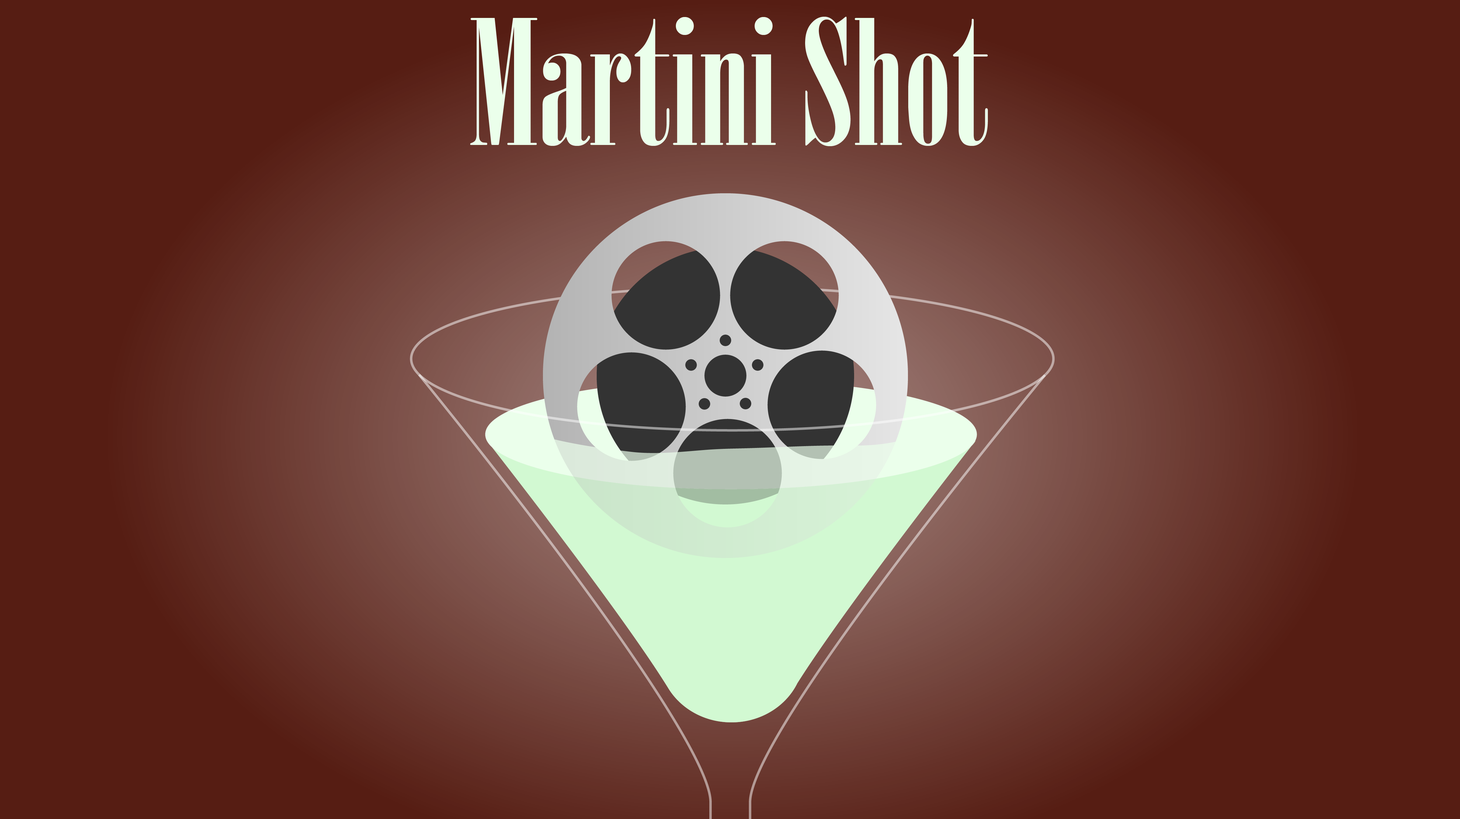 On this week's Martini Shot, Rob fails an essential job interview question to work for Peter Thiel’s venture fund. Or, for that matter, to have a hit television show. It’s the same question.